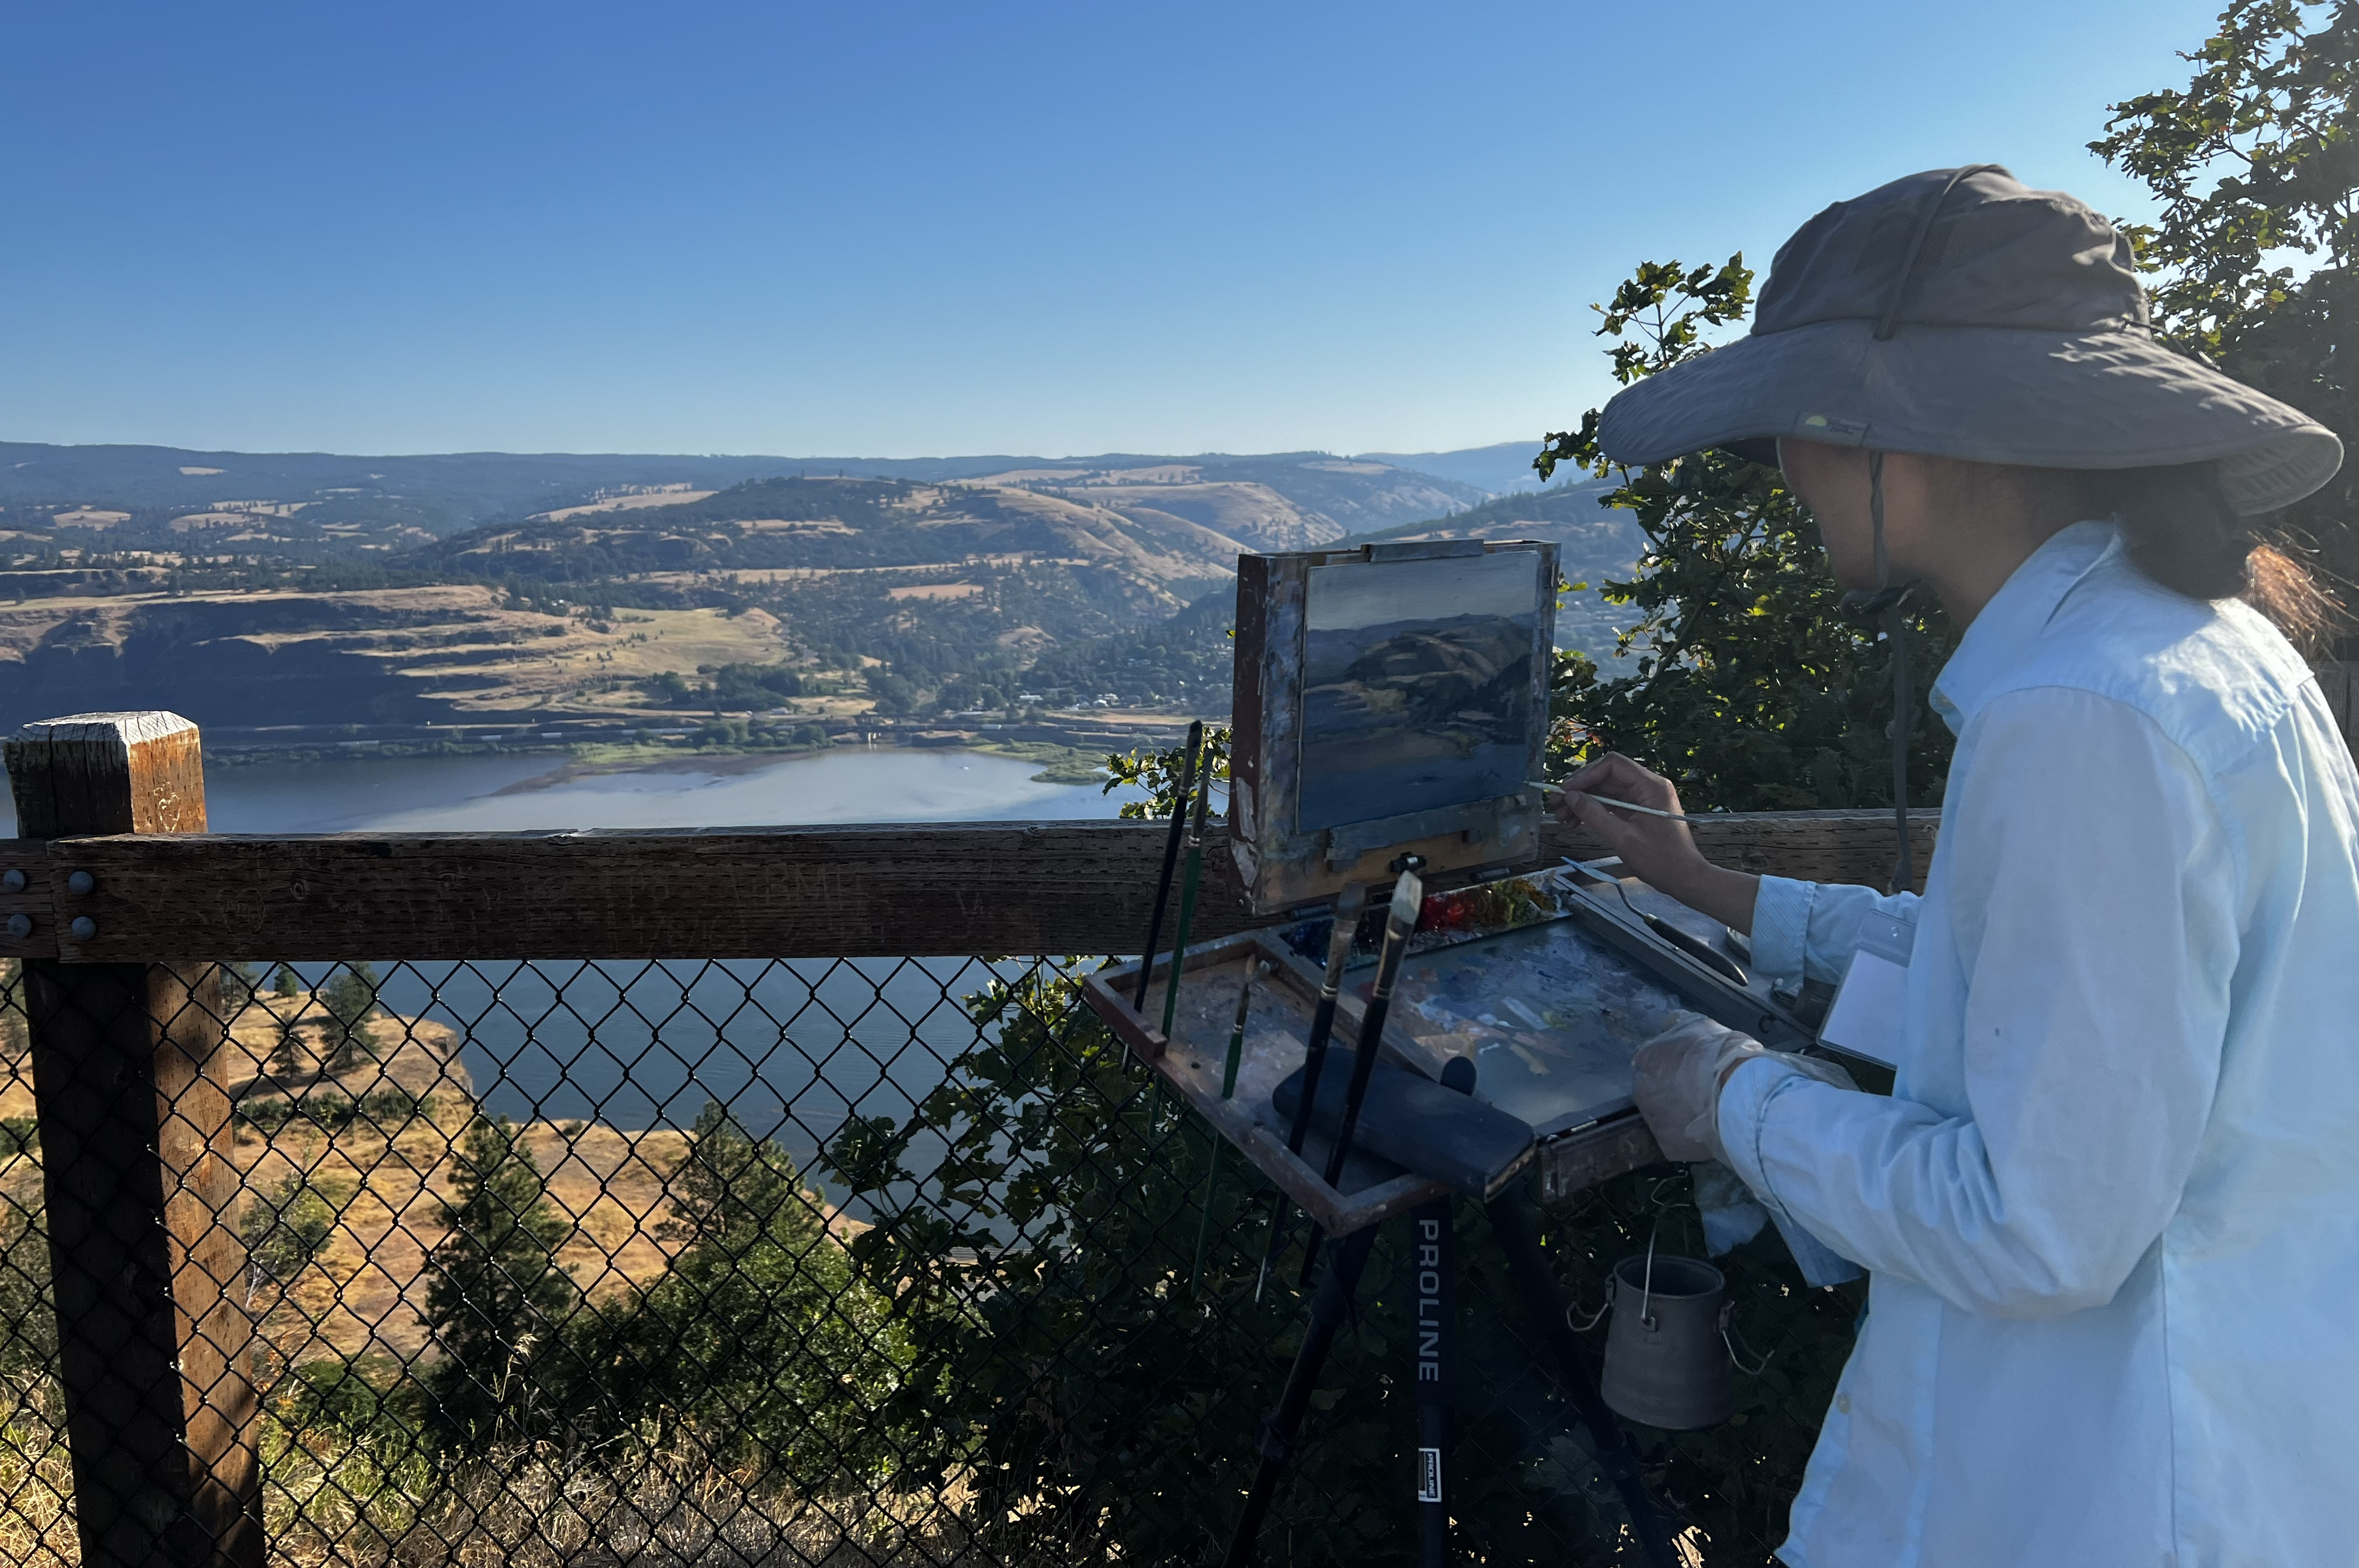 Plein Air 2022: Cultivating a Community of Painters